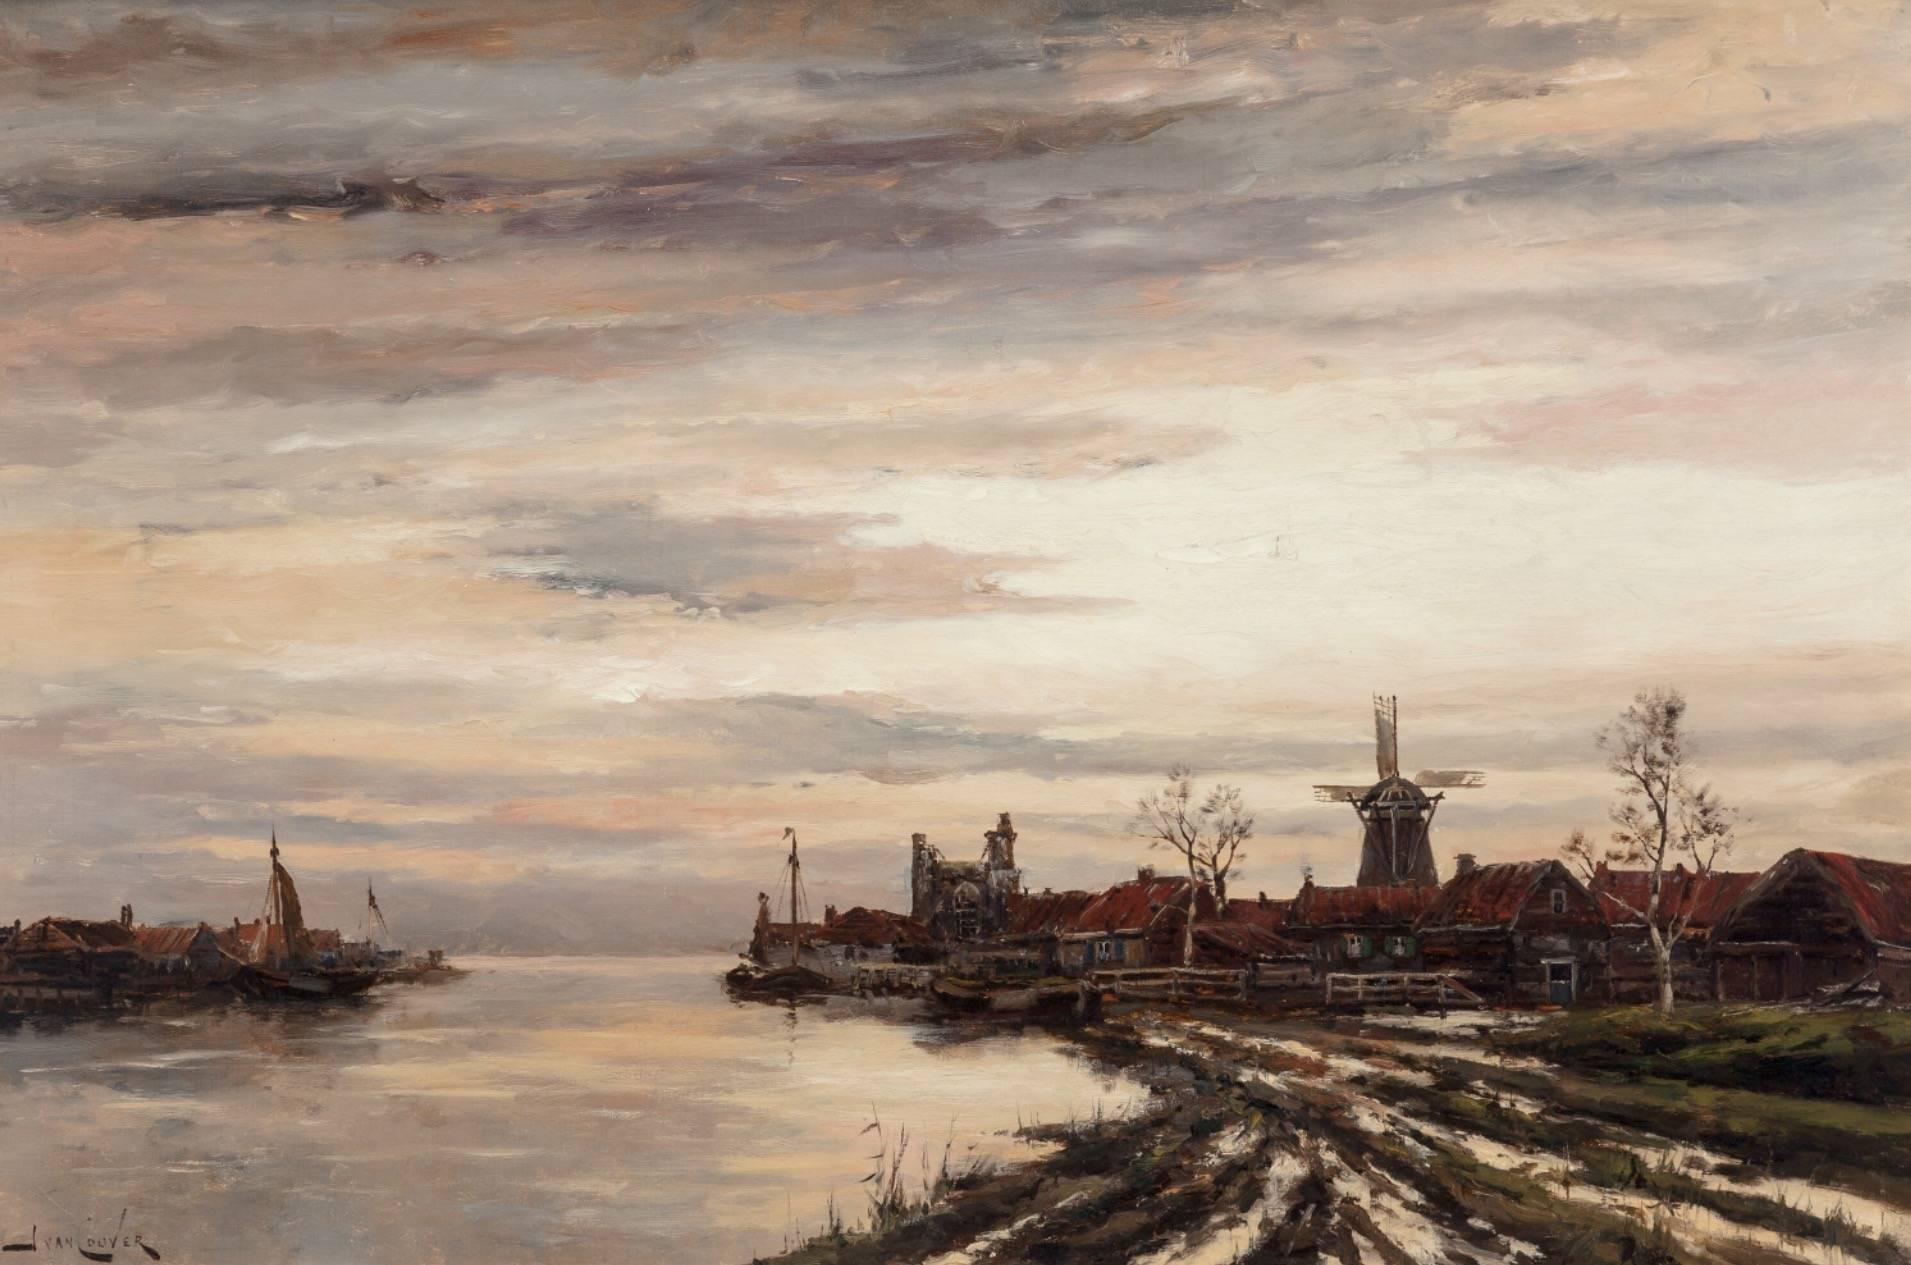 
Hermanus Koekkoek Jr. (Dutch, 1836-1909).
View of Dutch A Harbor in Winter.
Oil on canvas.
Measures: 24 x 36 inches (61.0 x 91.4 cm).
Signed lower left: J van Couver.

A powerful yet serene Dutch harbour in winter with detailed signs of strife and